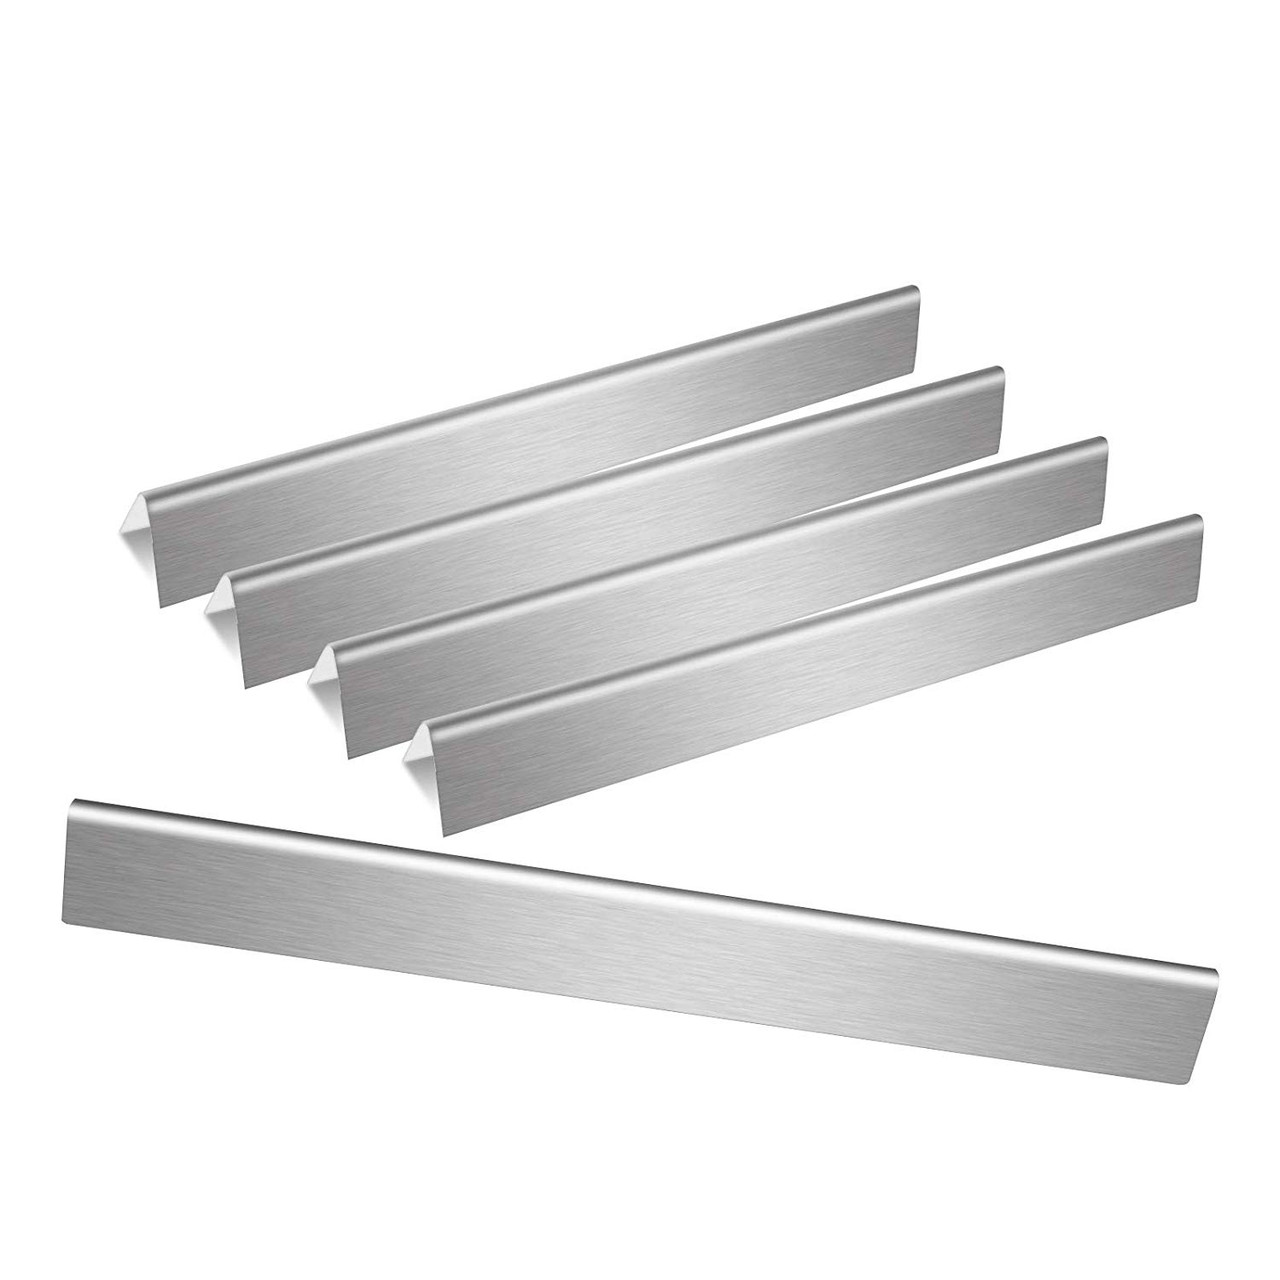 Grill  Parts for Weber Spirit E-210 Stainless Steel Flavorizer Bars